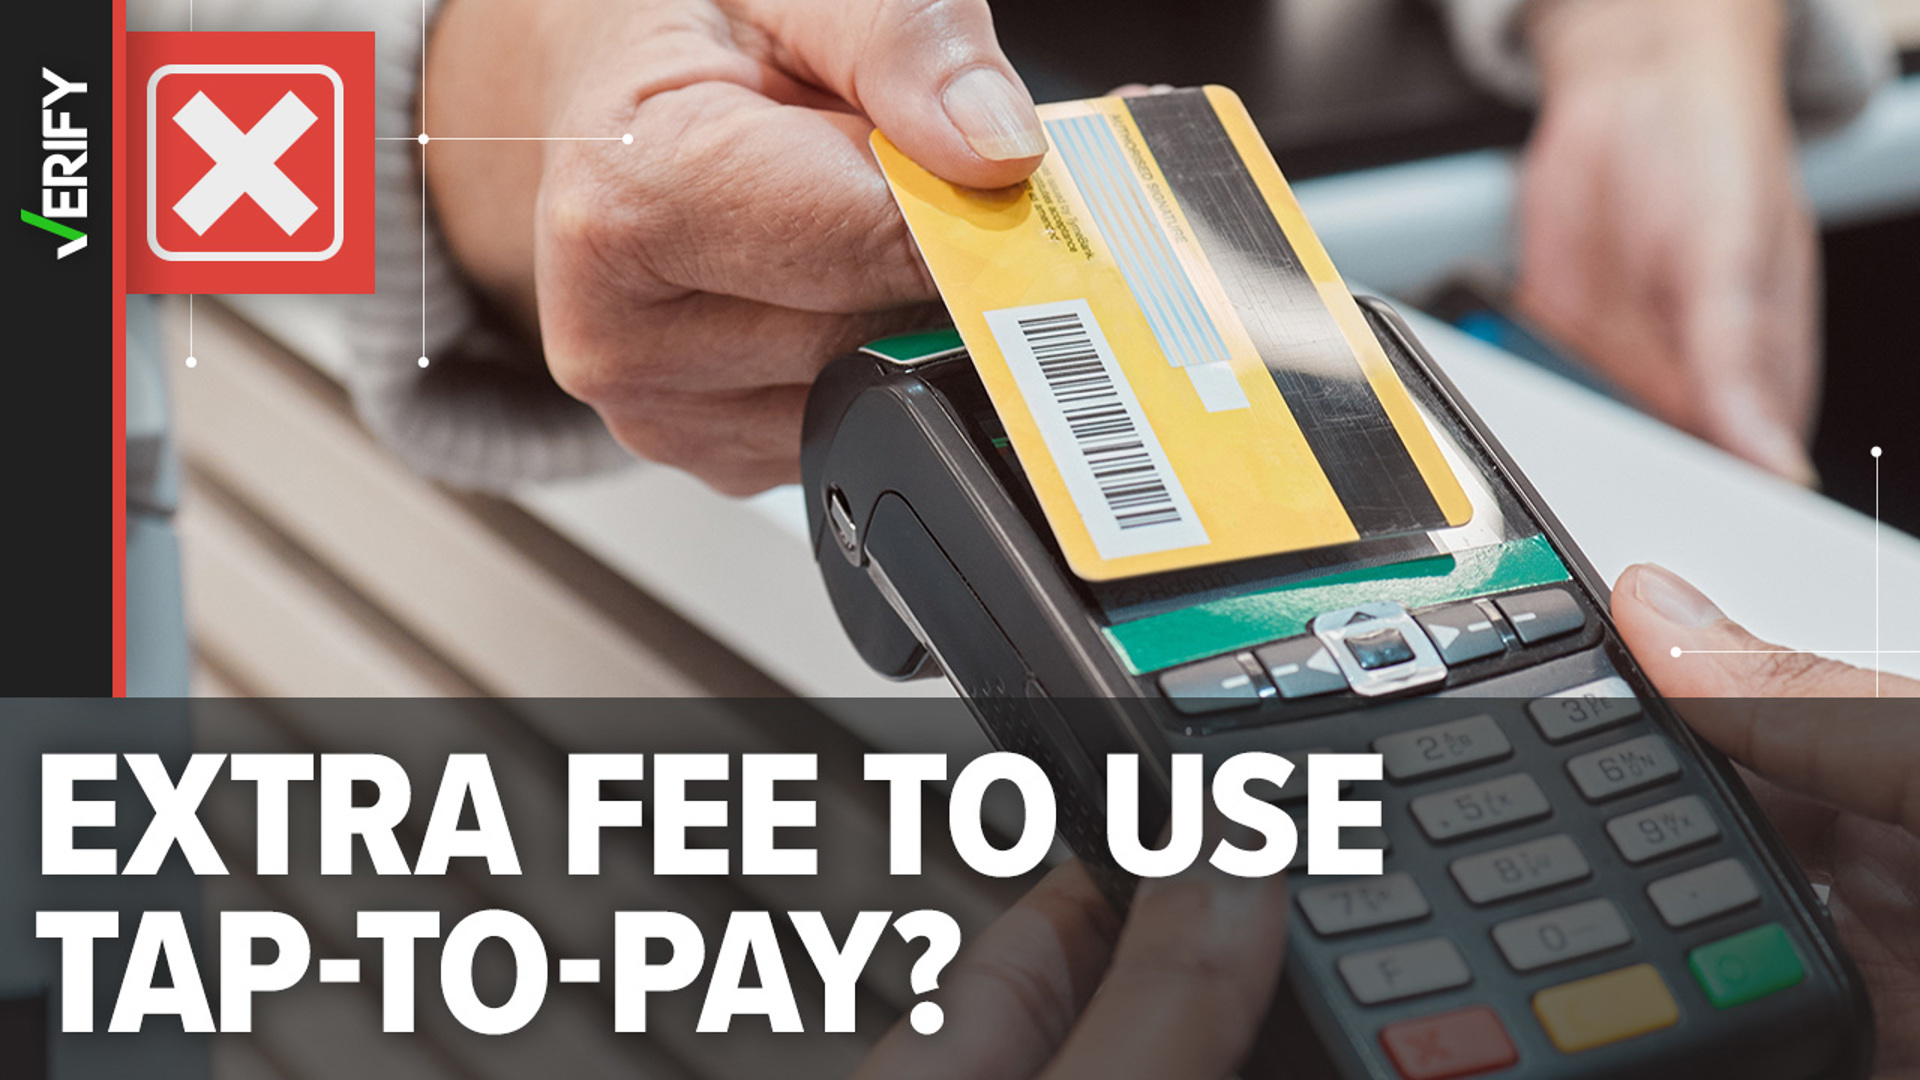 Consumers aren’t charged additional fees for using tap-to-pay methods instead of swiping or inserting their credit or debit cards.